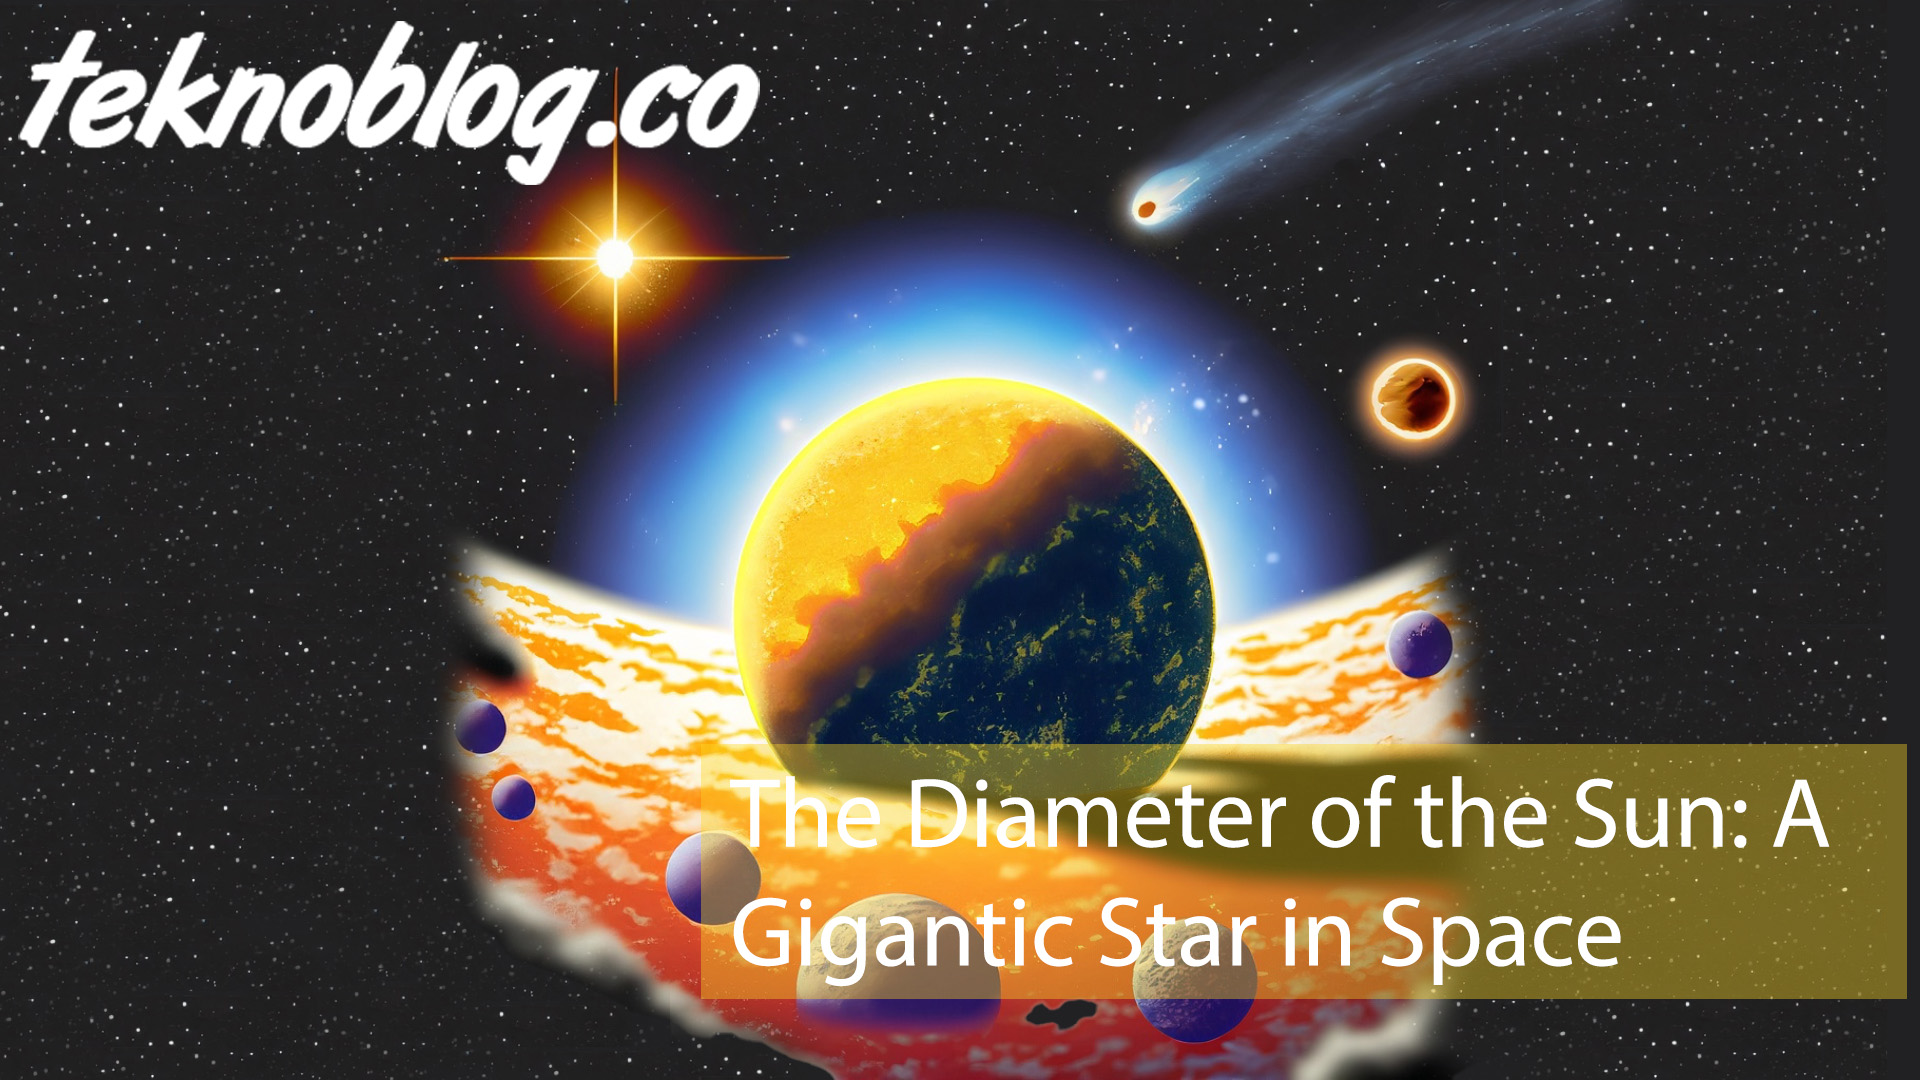 The Diameter of the Sun: A Gigantic Star in Space